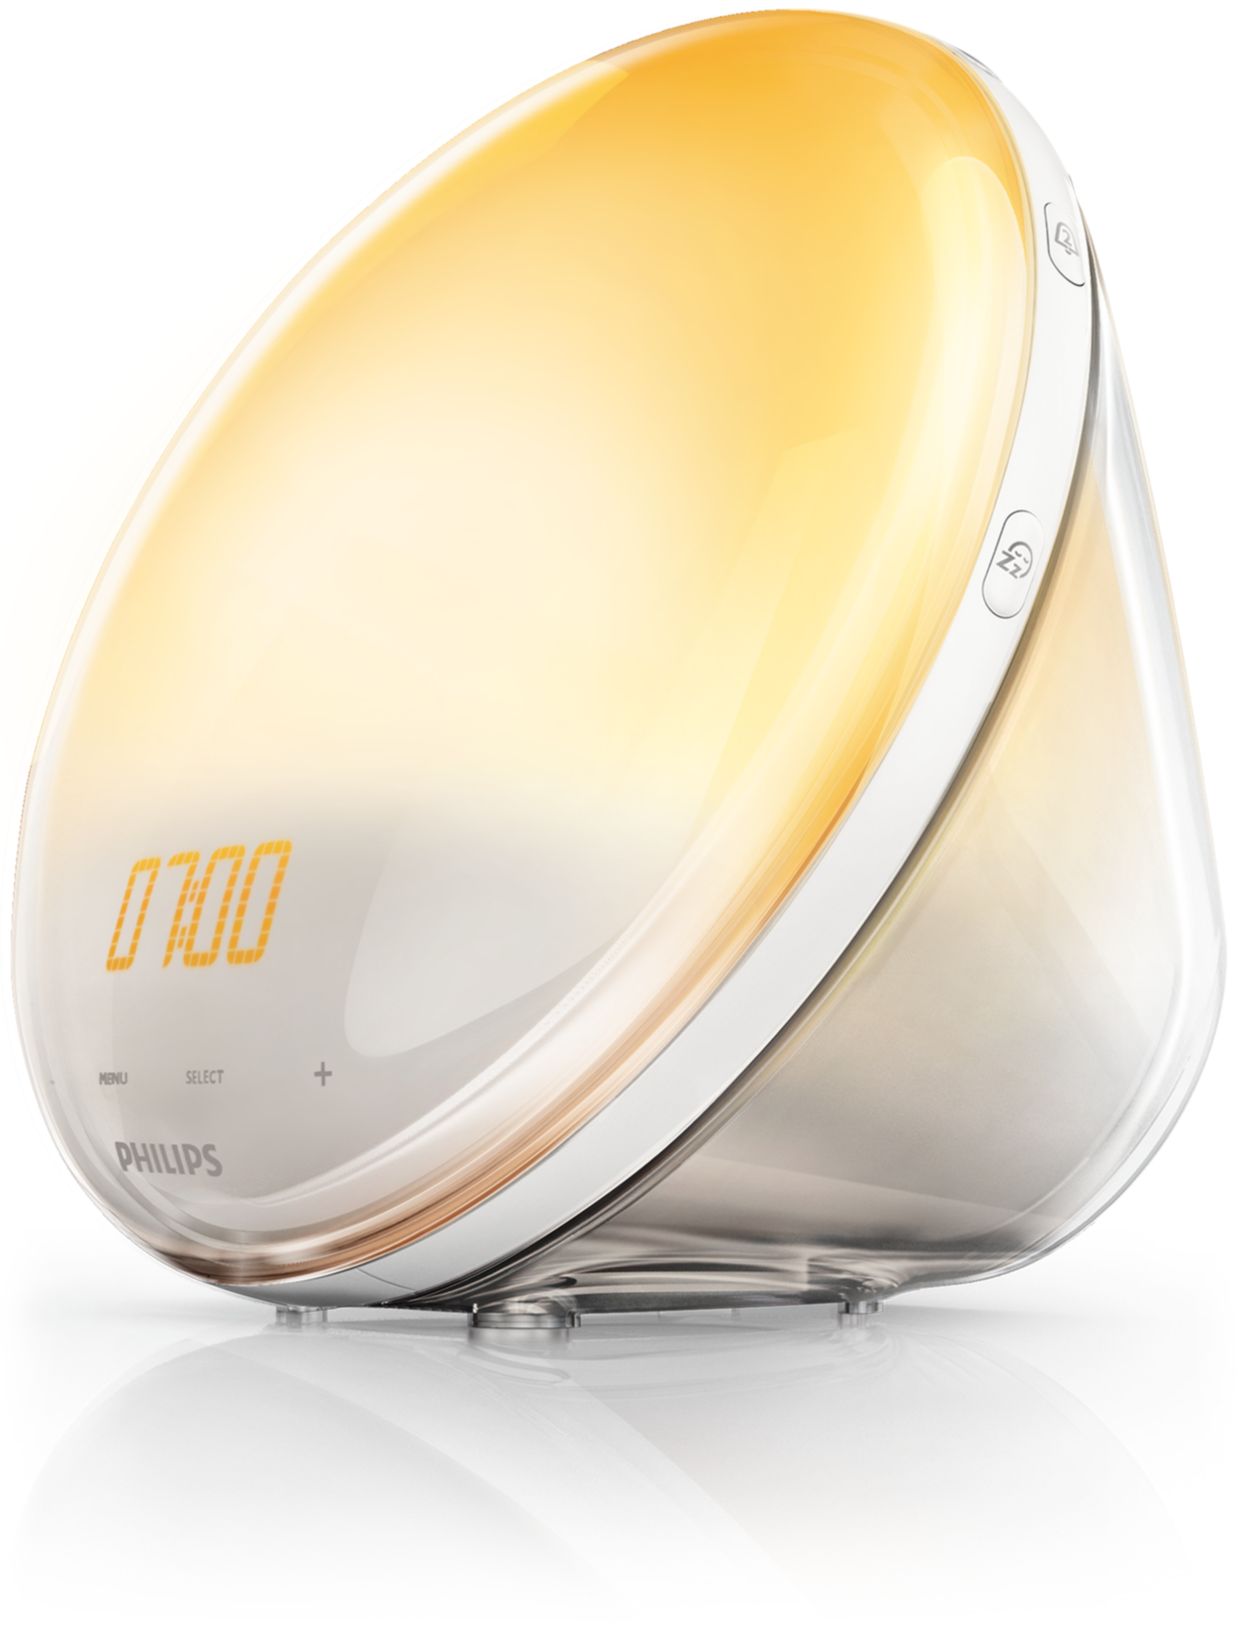 Philips Wake-Up Light With Colored Sunrise Simulation for Natural Waking